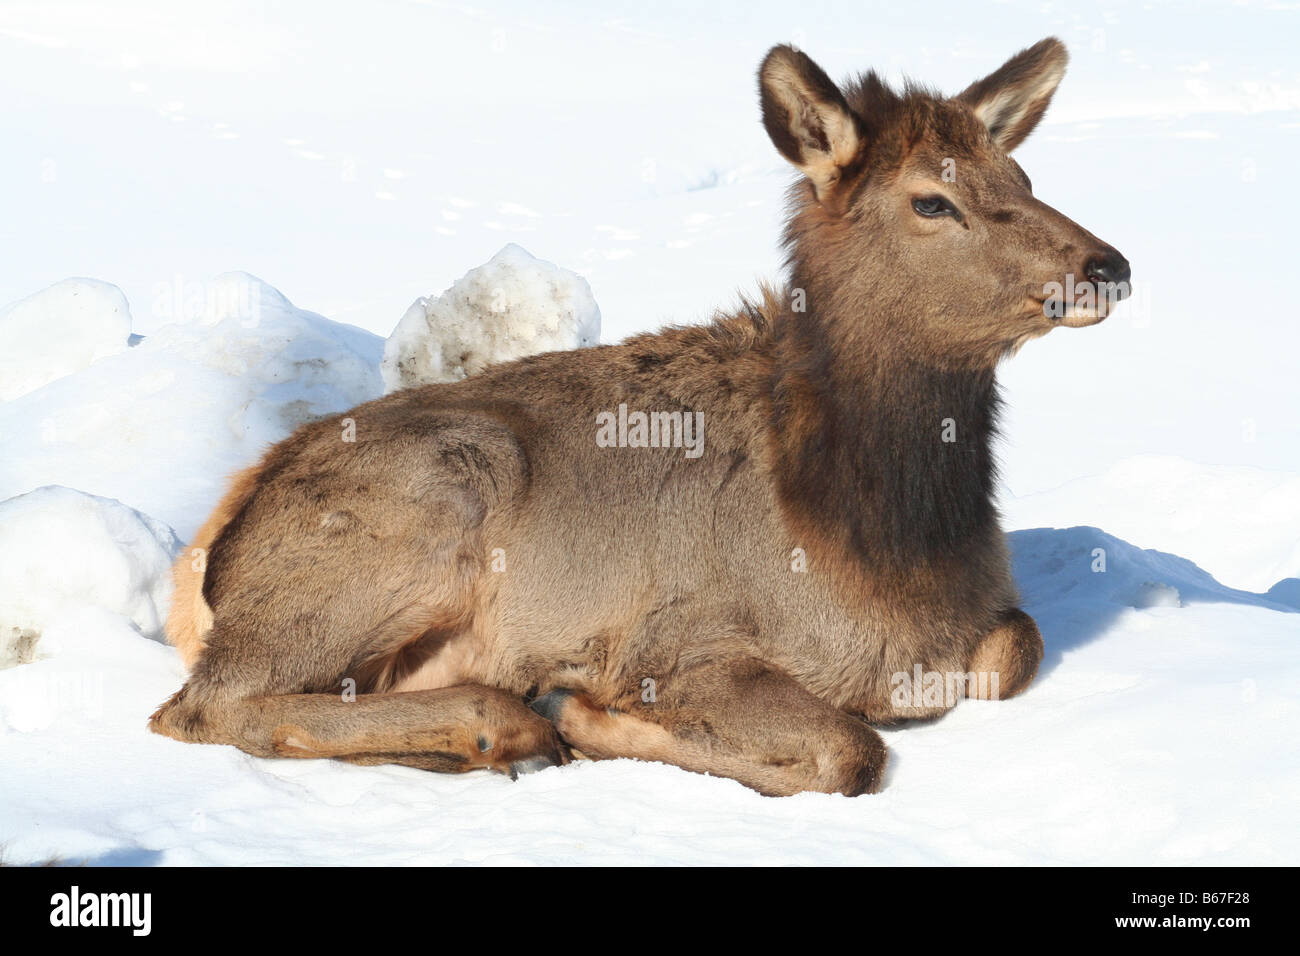 Baby Caribou lying in snow Stock Photo